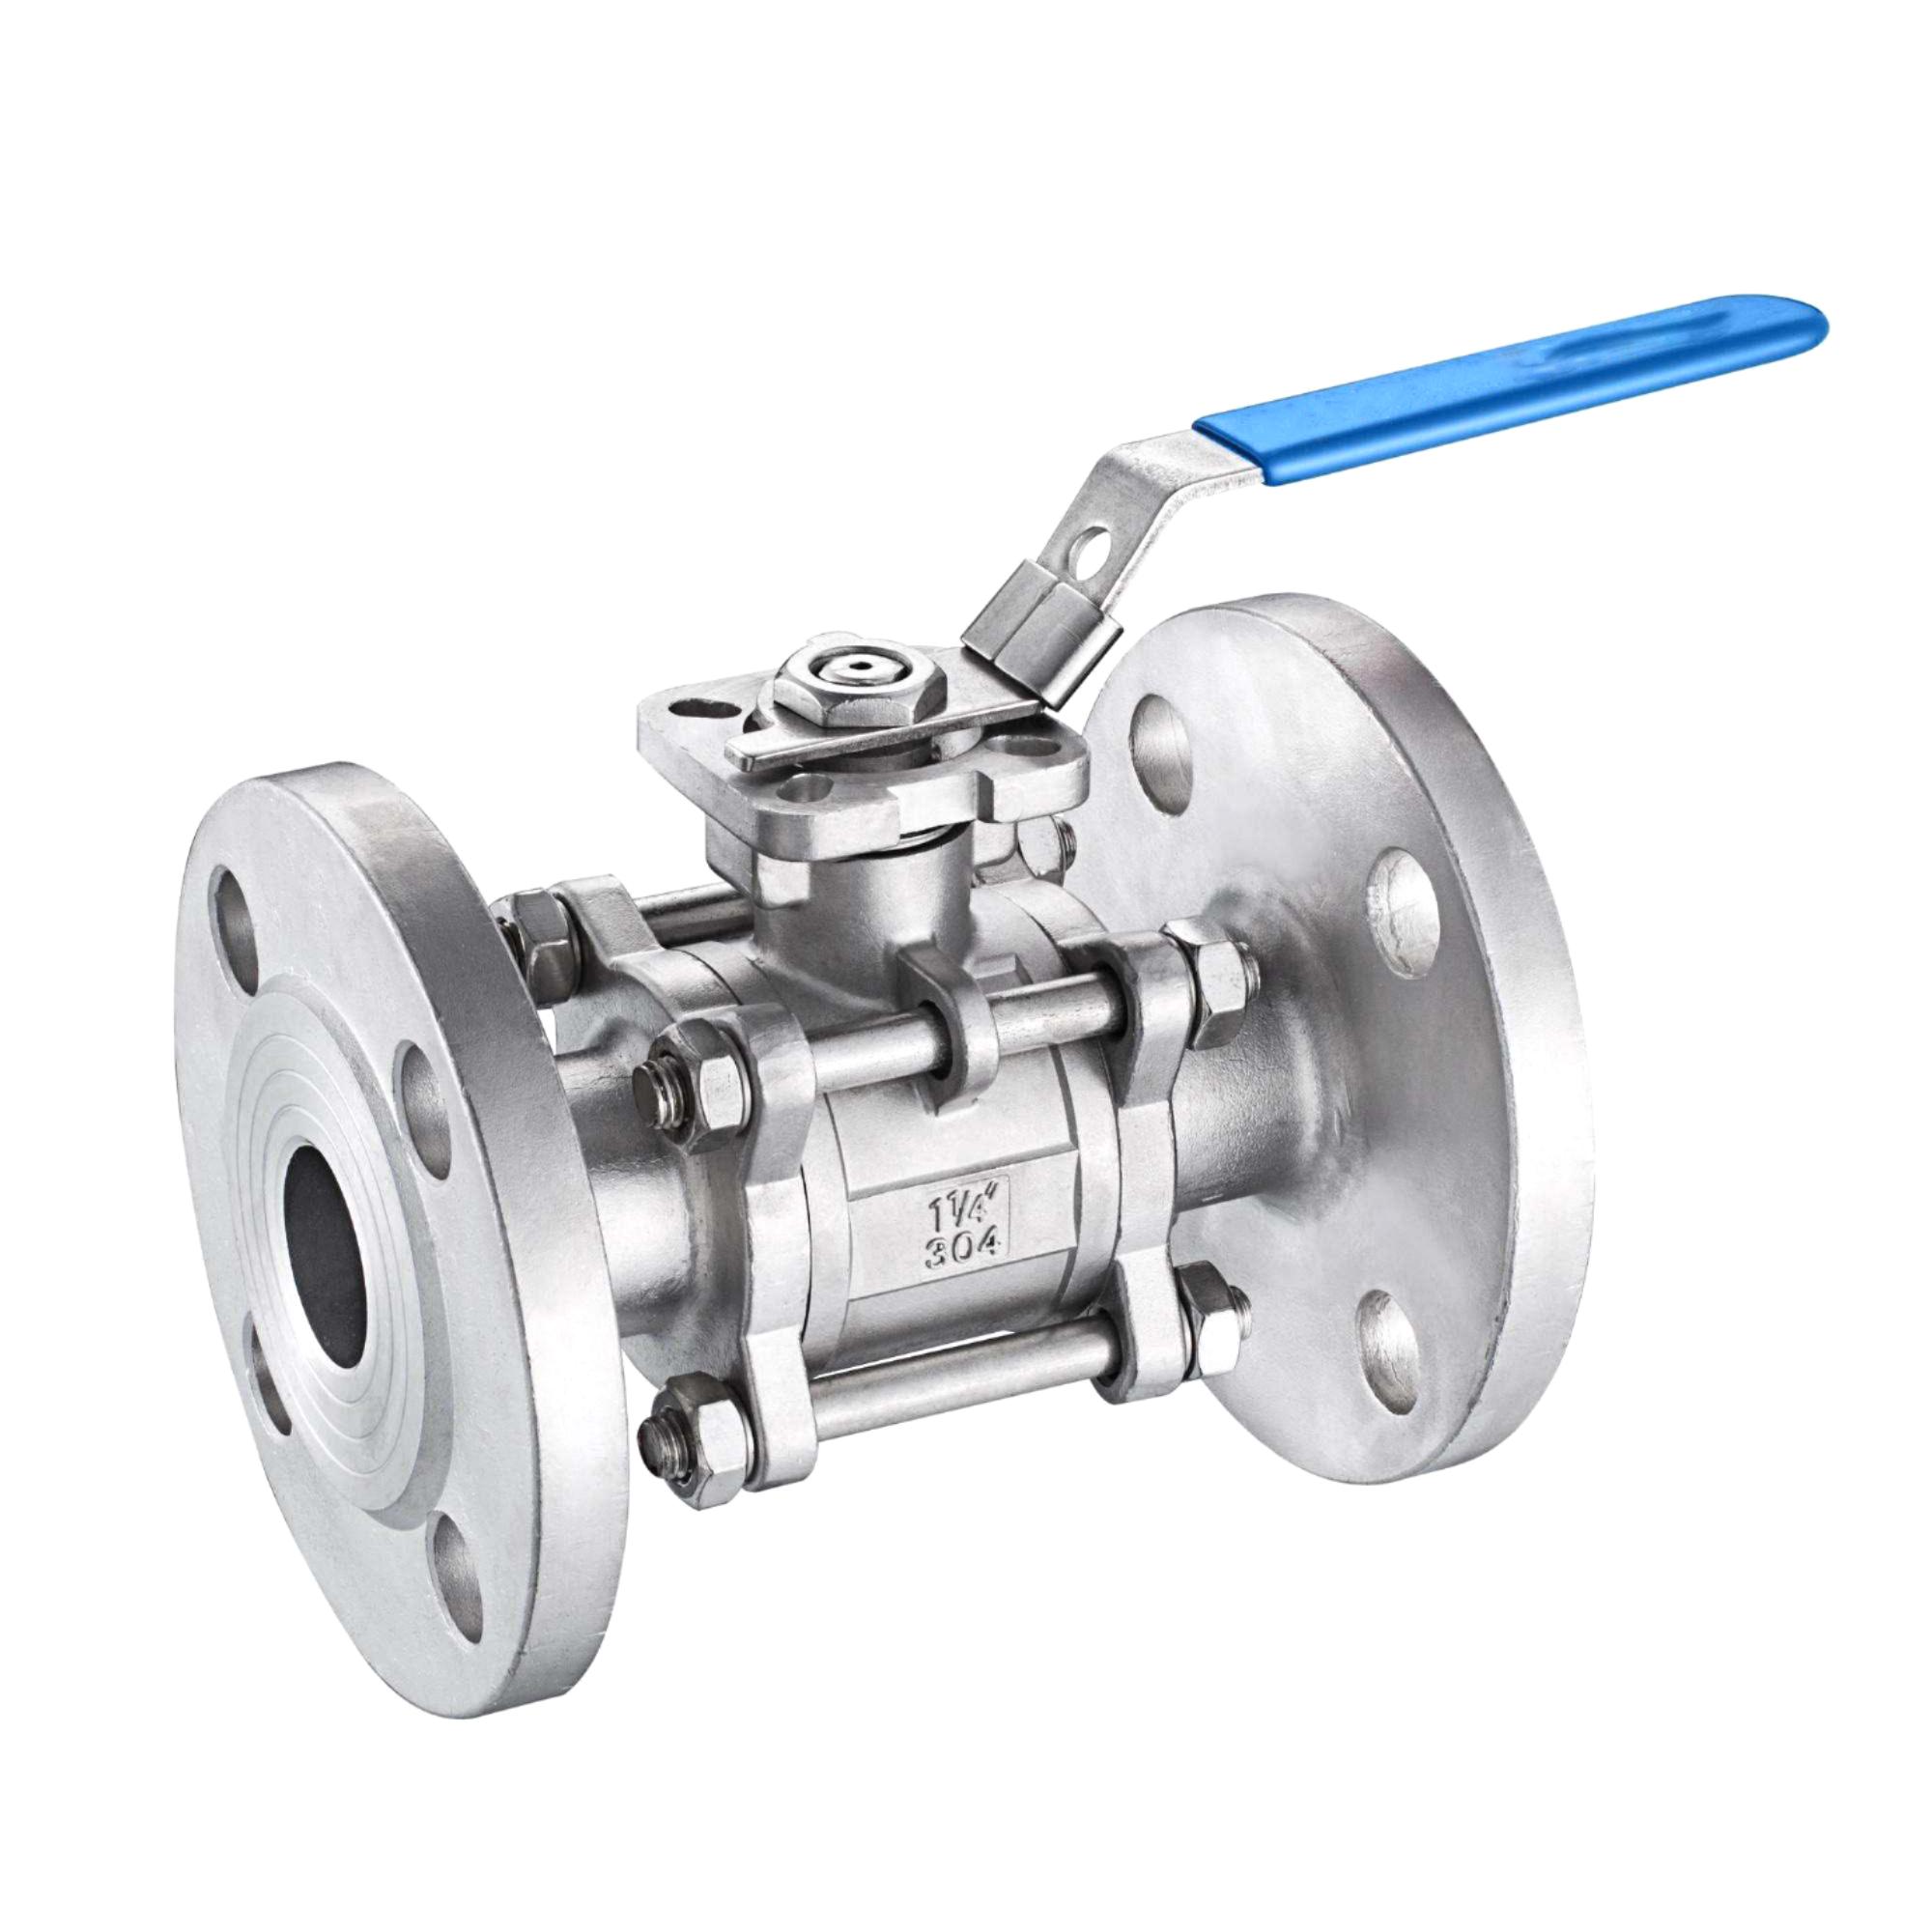 Stainless Steel Flanged Ball Valve